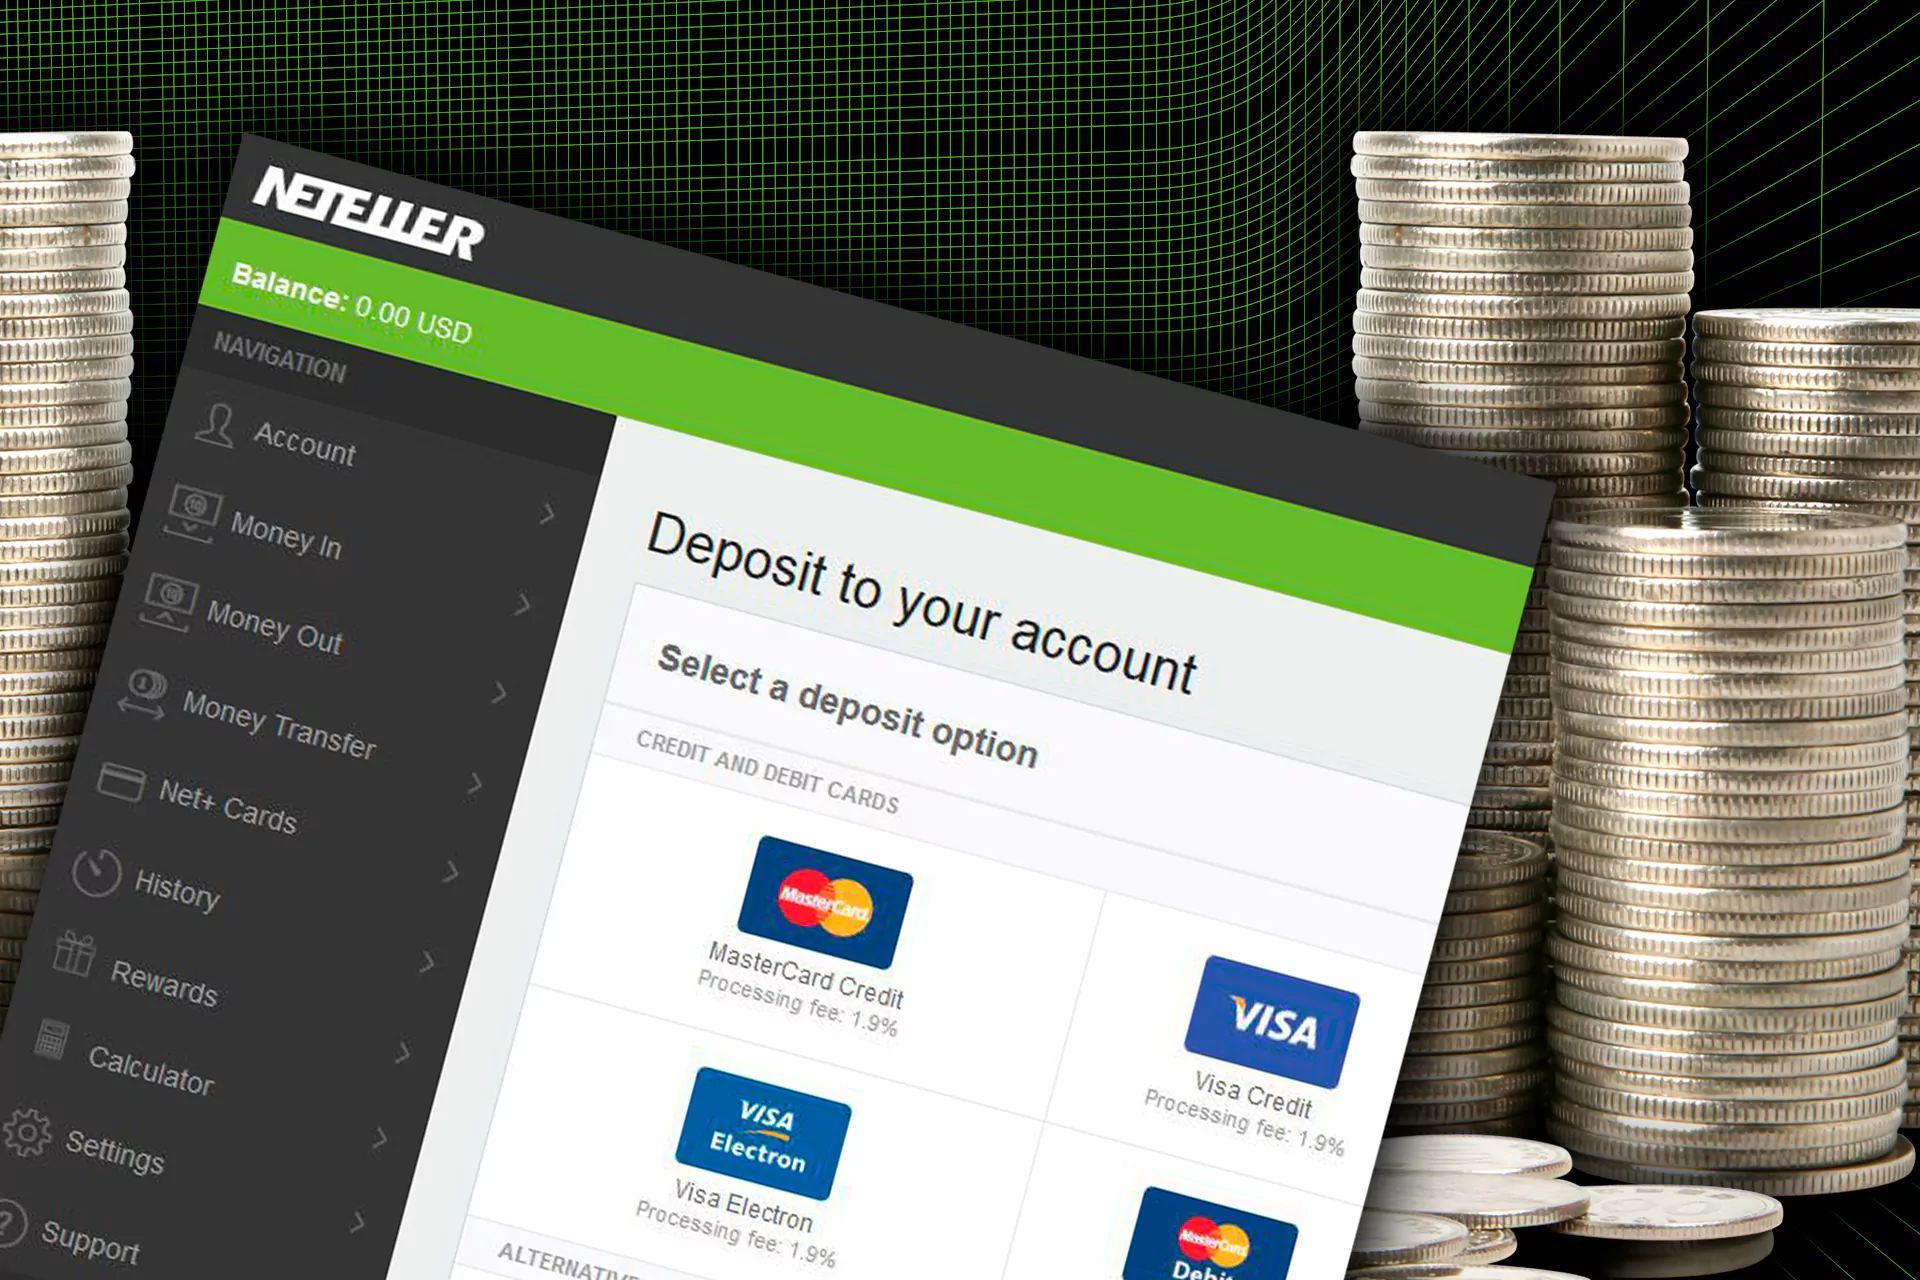 You can choose Neteller as your deposit method at the betting website.